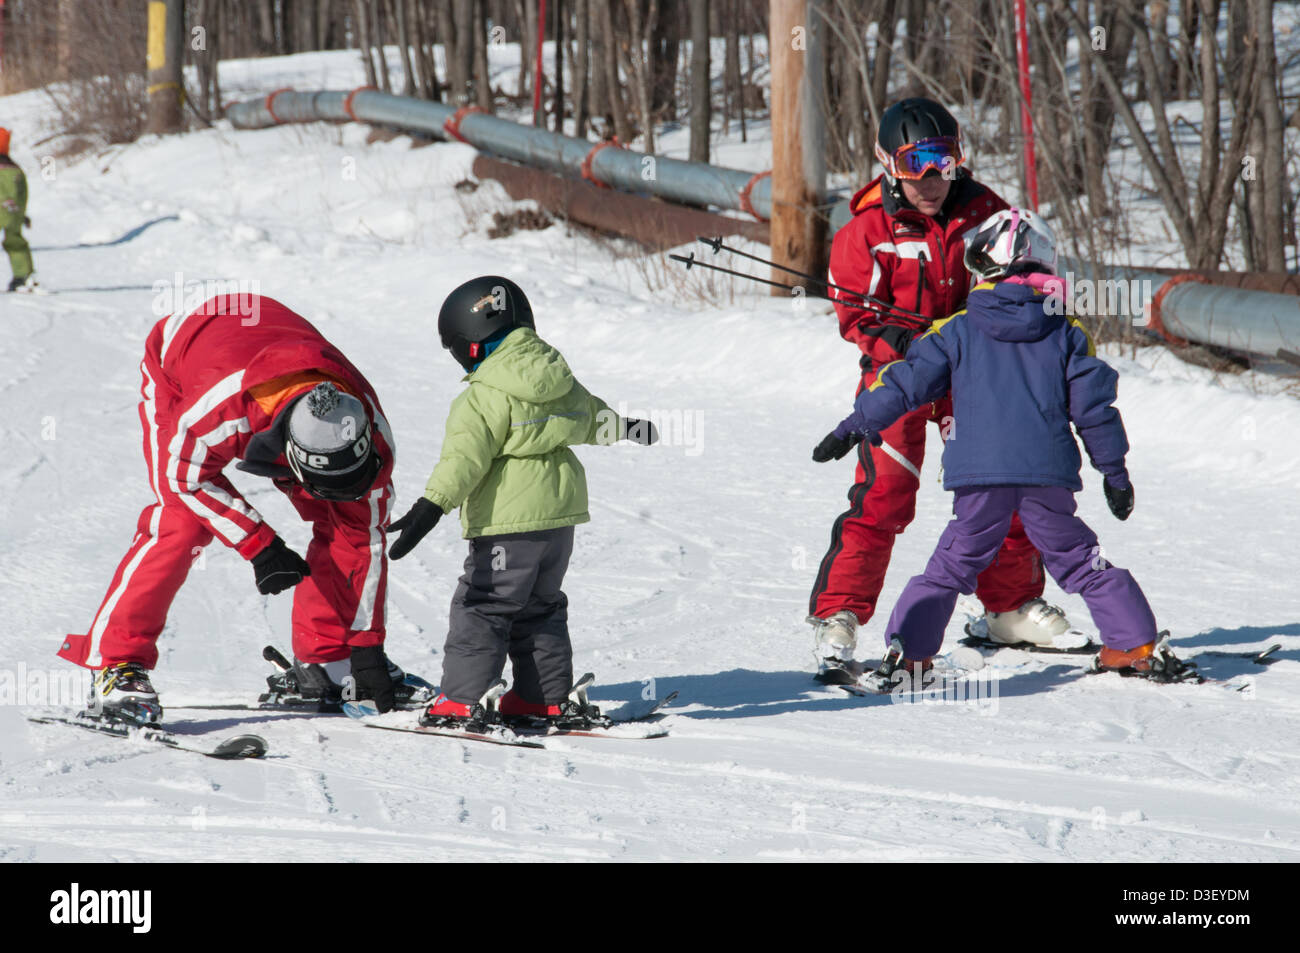 First Ski lesson of Alix, a three years old from Montreal who came with his parents for his first  private ski lesson The Ski Saint Bruno station open since 1965 has had 500 000 students graduating from its ski school. Stock Photo